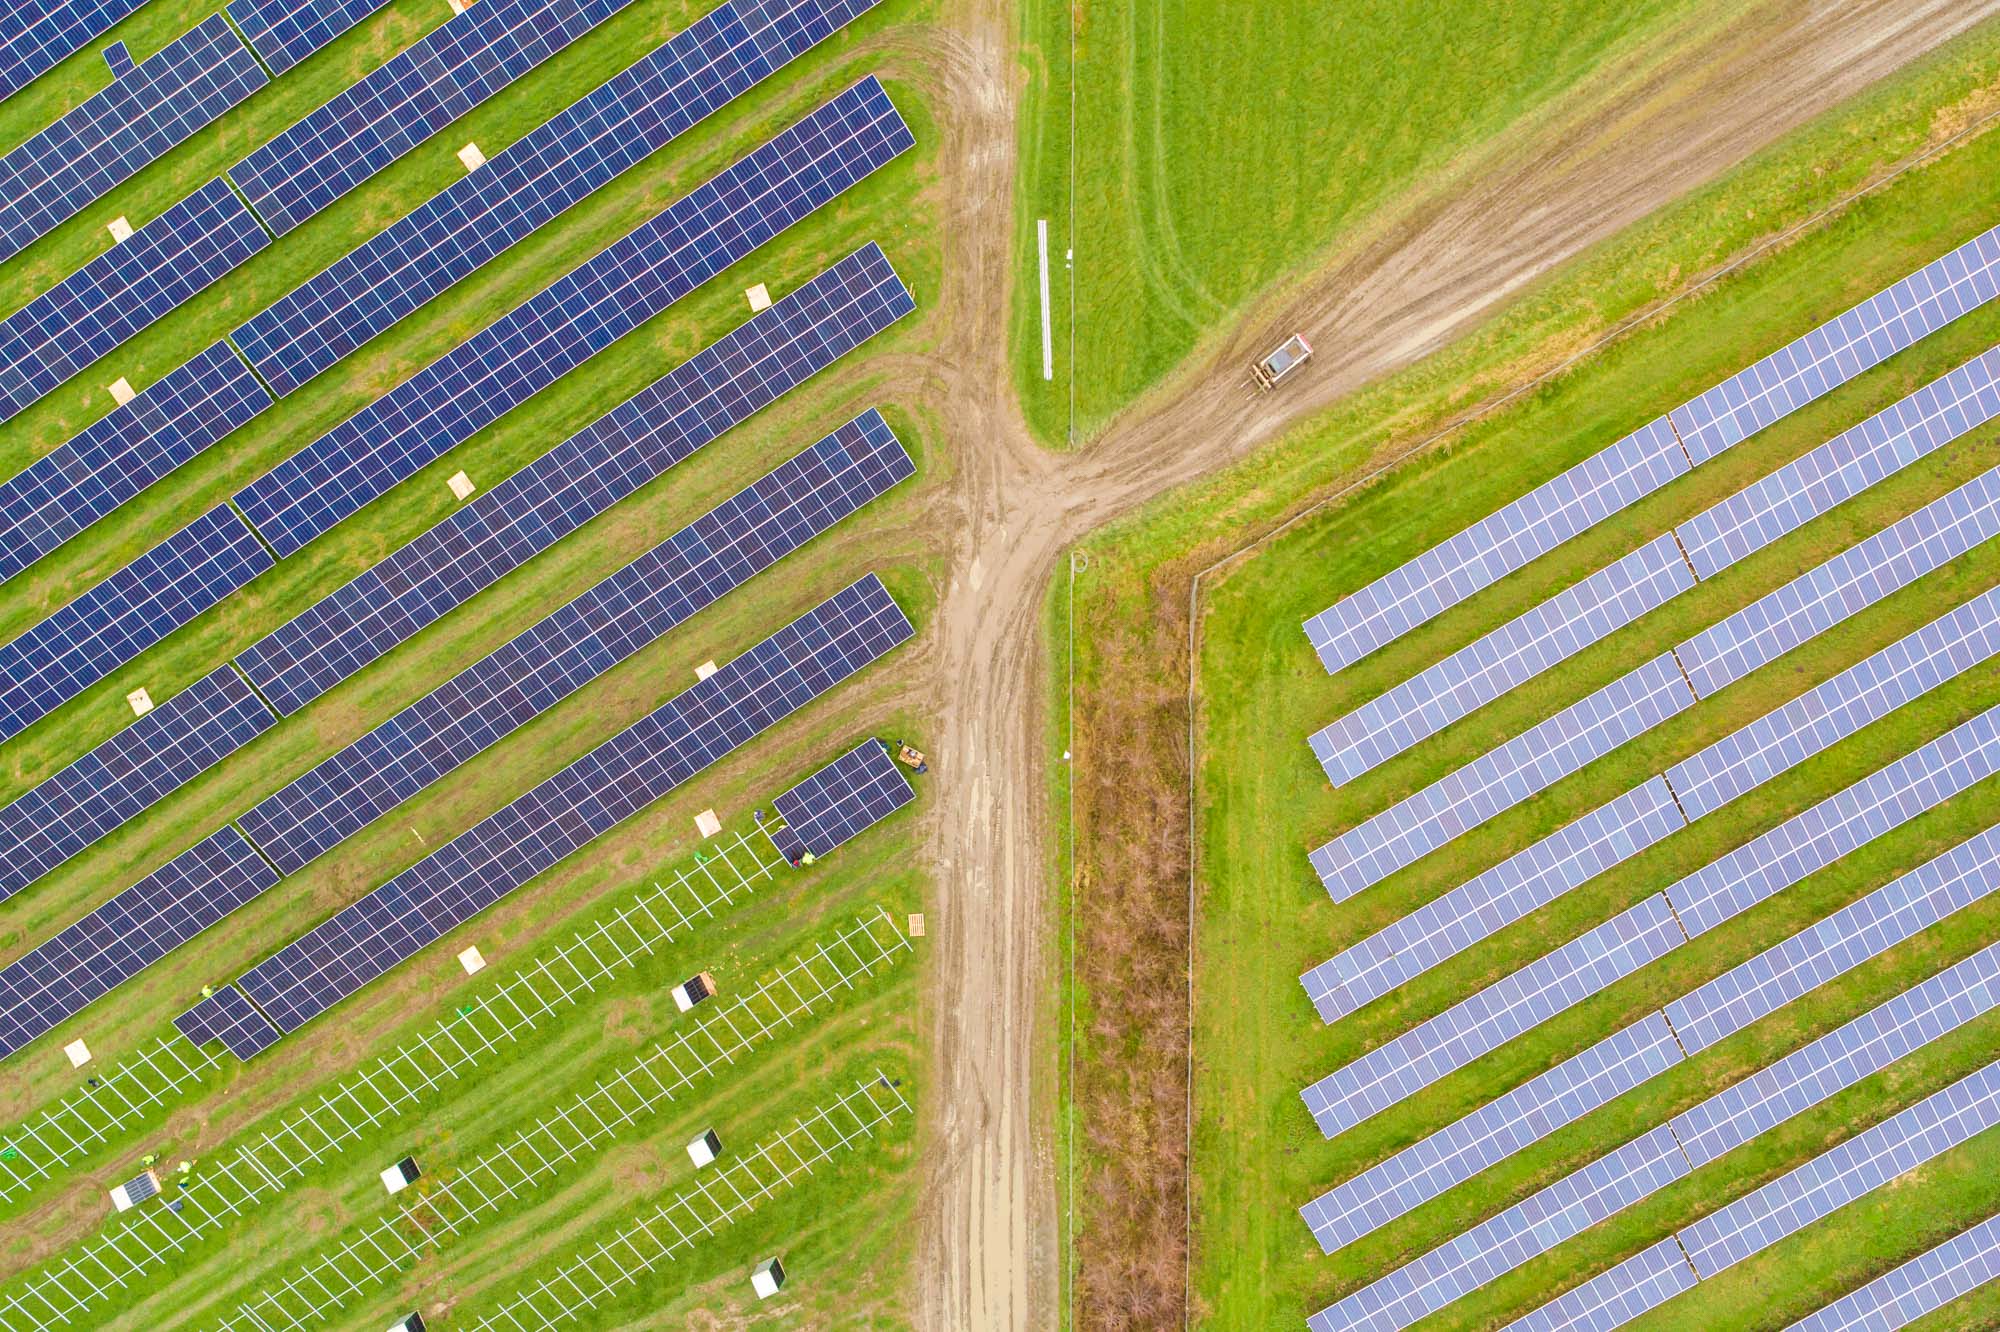 Aerial shot of a field filled with solar panels